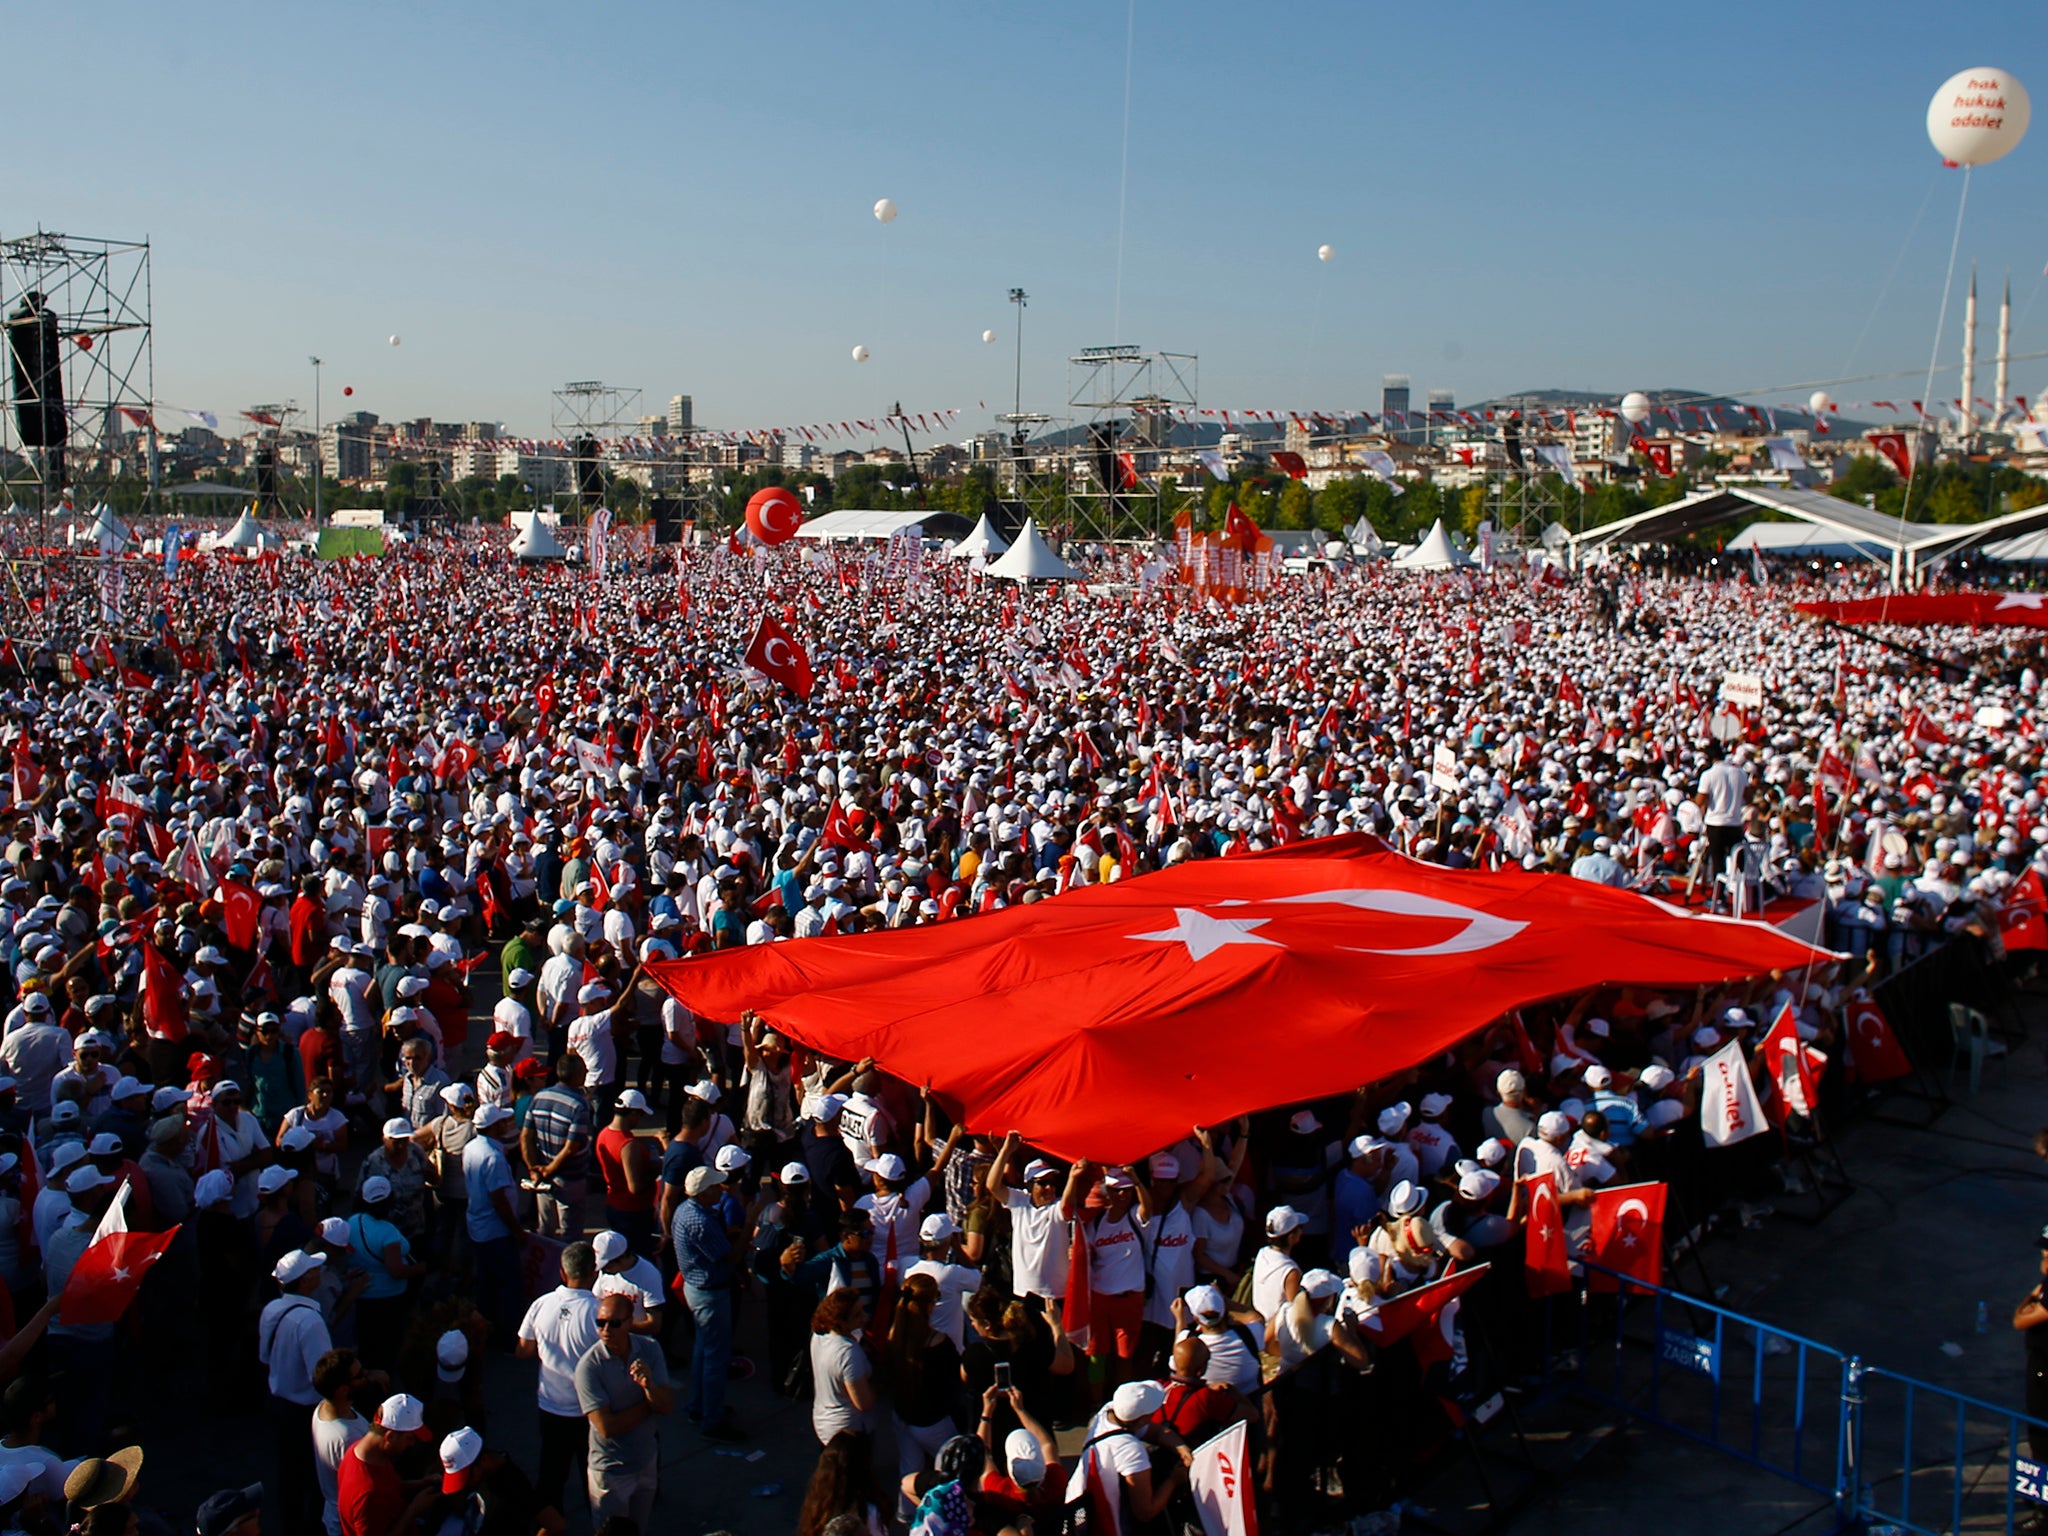 Thousands of people gathered in Istanbul to conclude an opposition-led 'march for justice' against the government